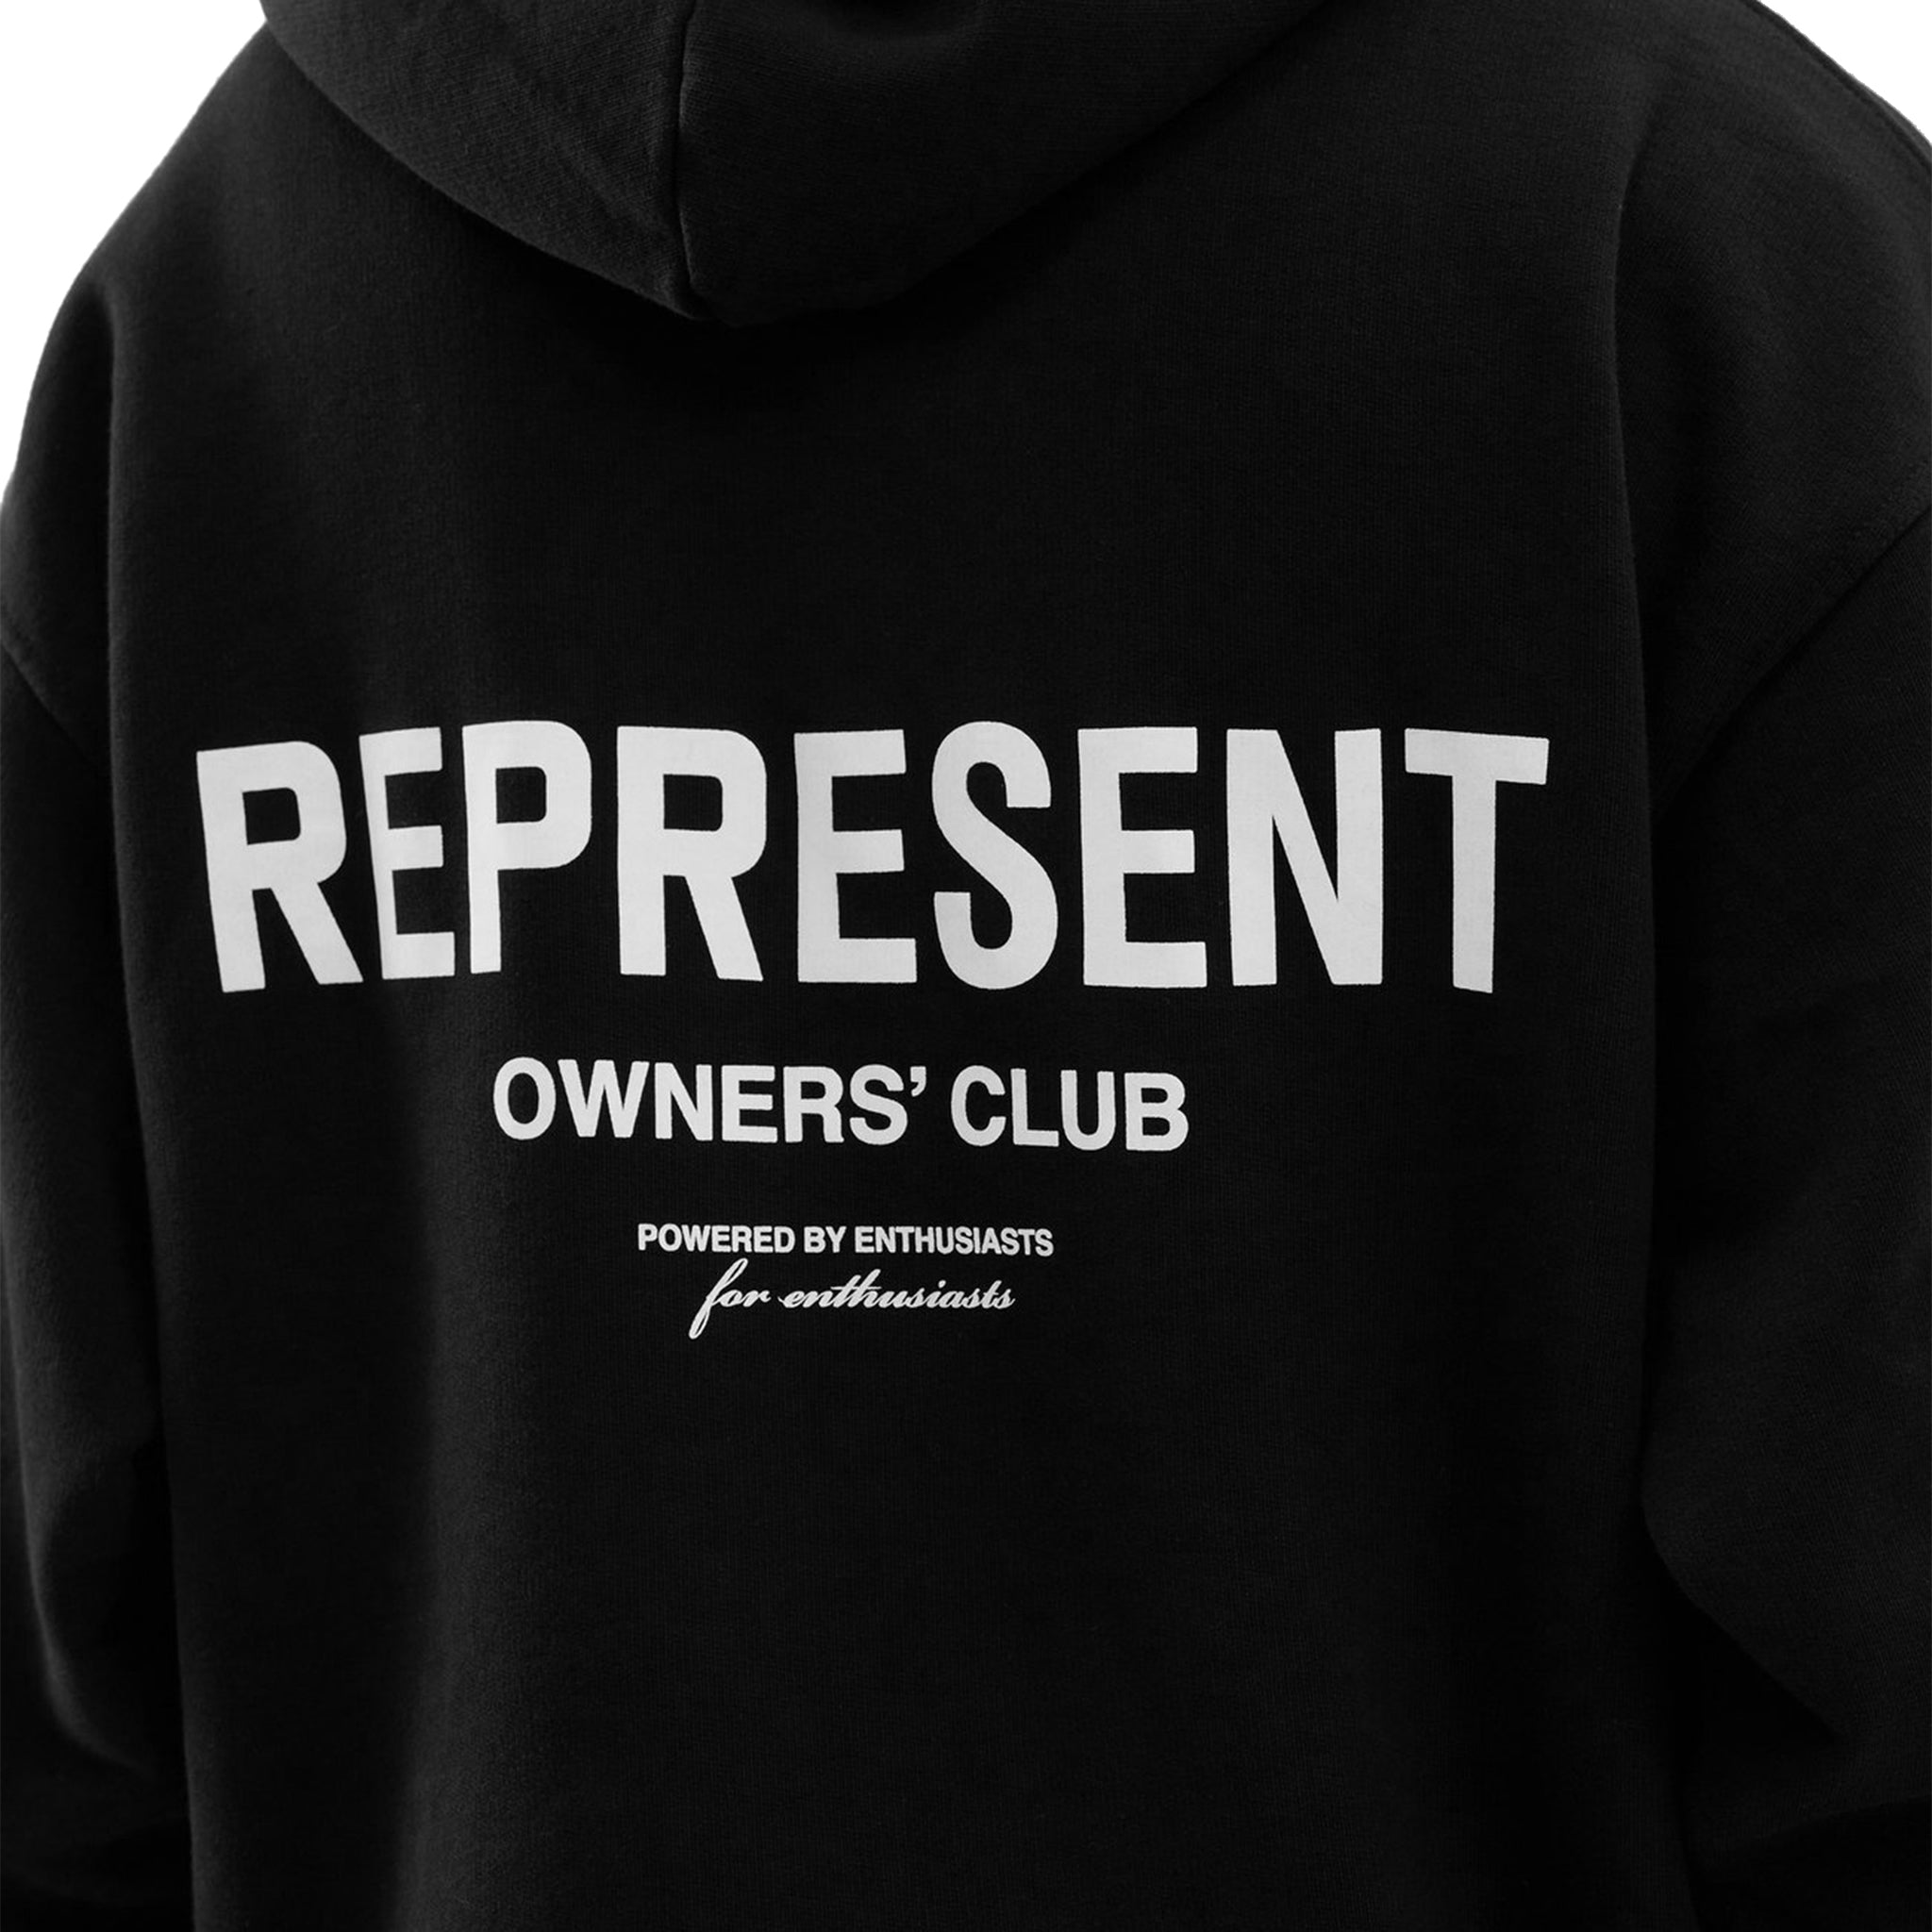 Back logo view of Represent Owners Club Black Hoodie M04153-01